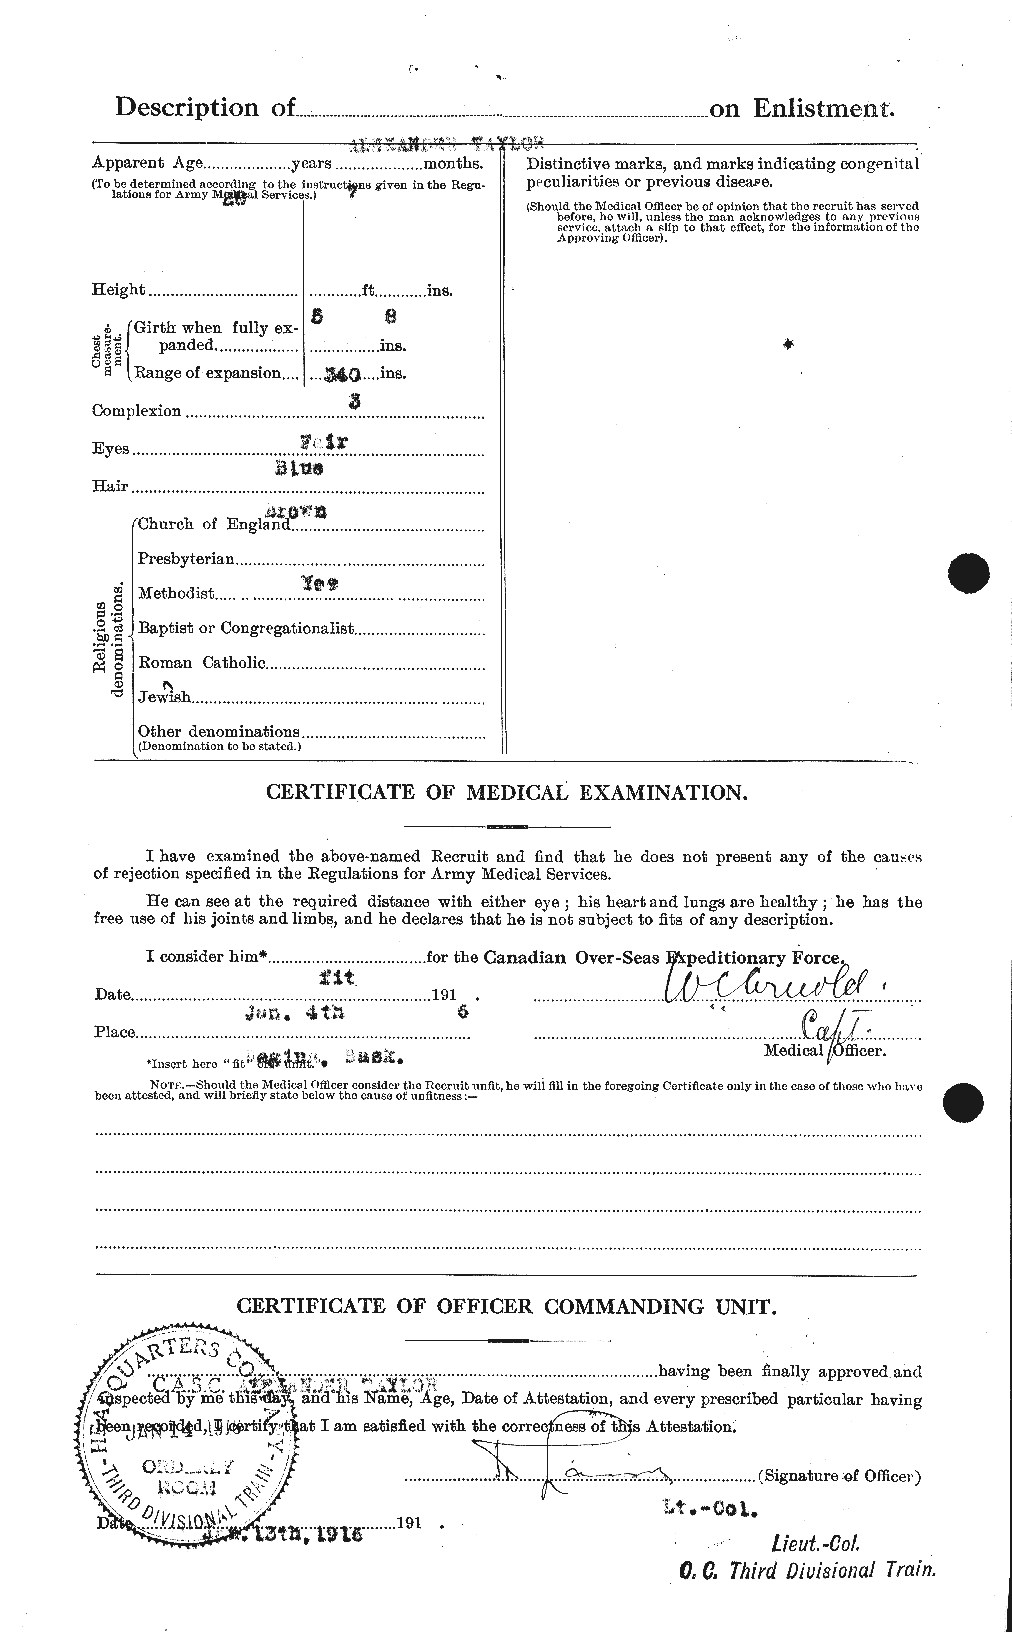 Personnel Records of the First World War - CEF 626142b